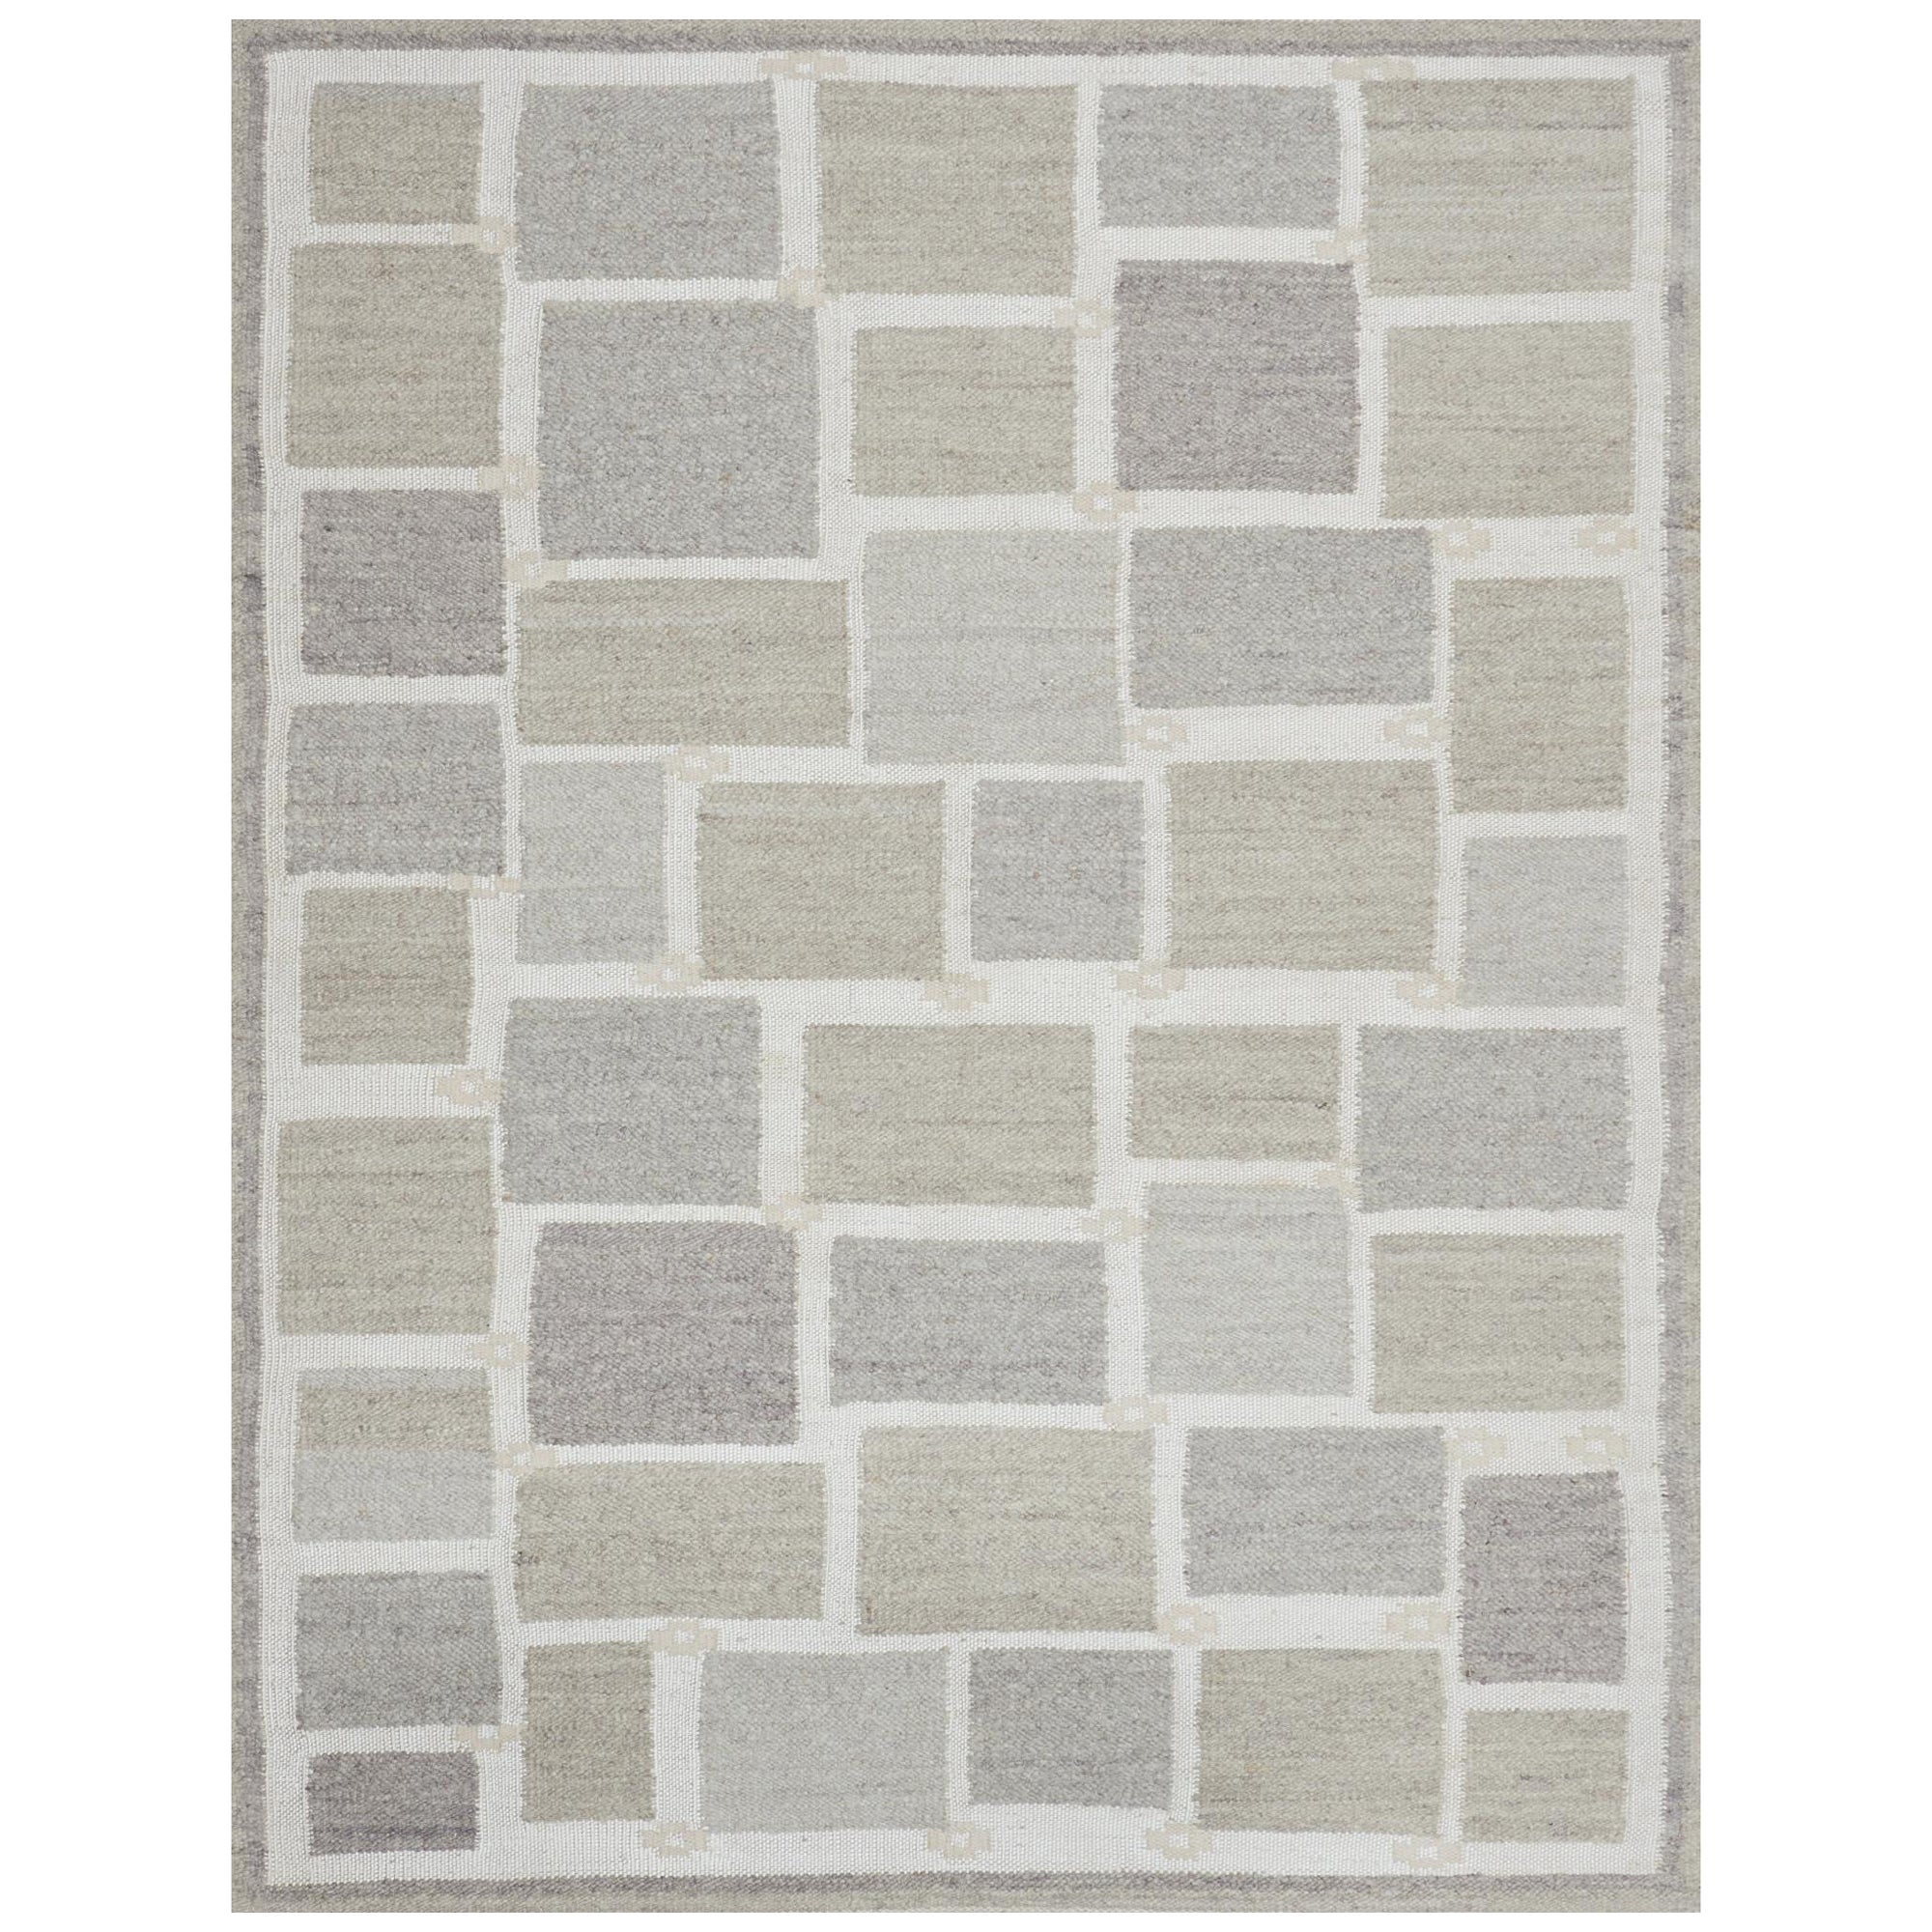 Hand-made Contemporary Swedish-Inspired Wool Flat-weave rug